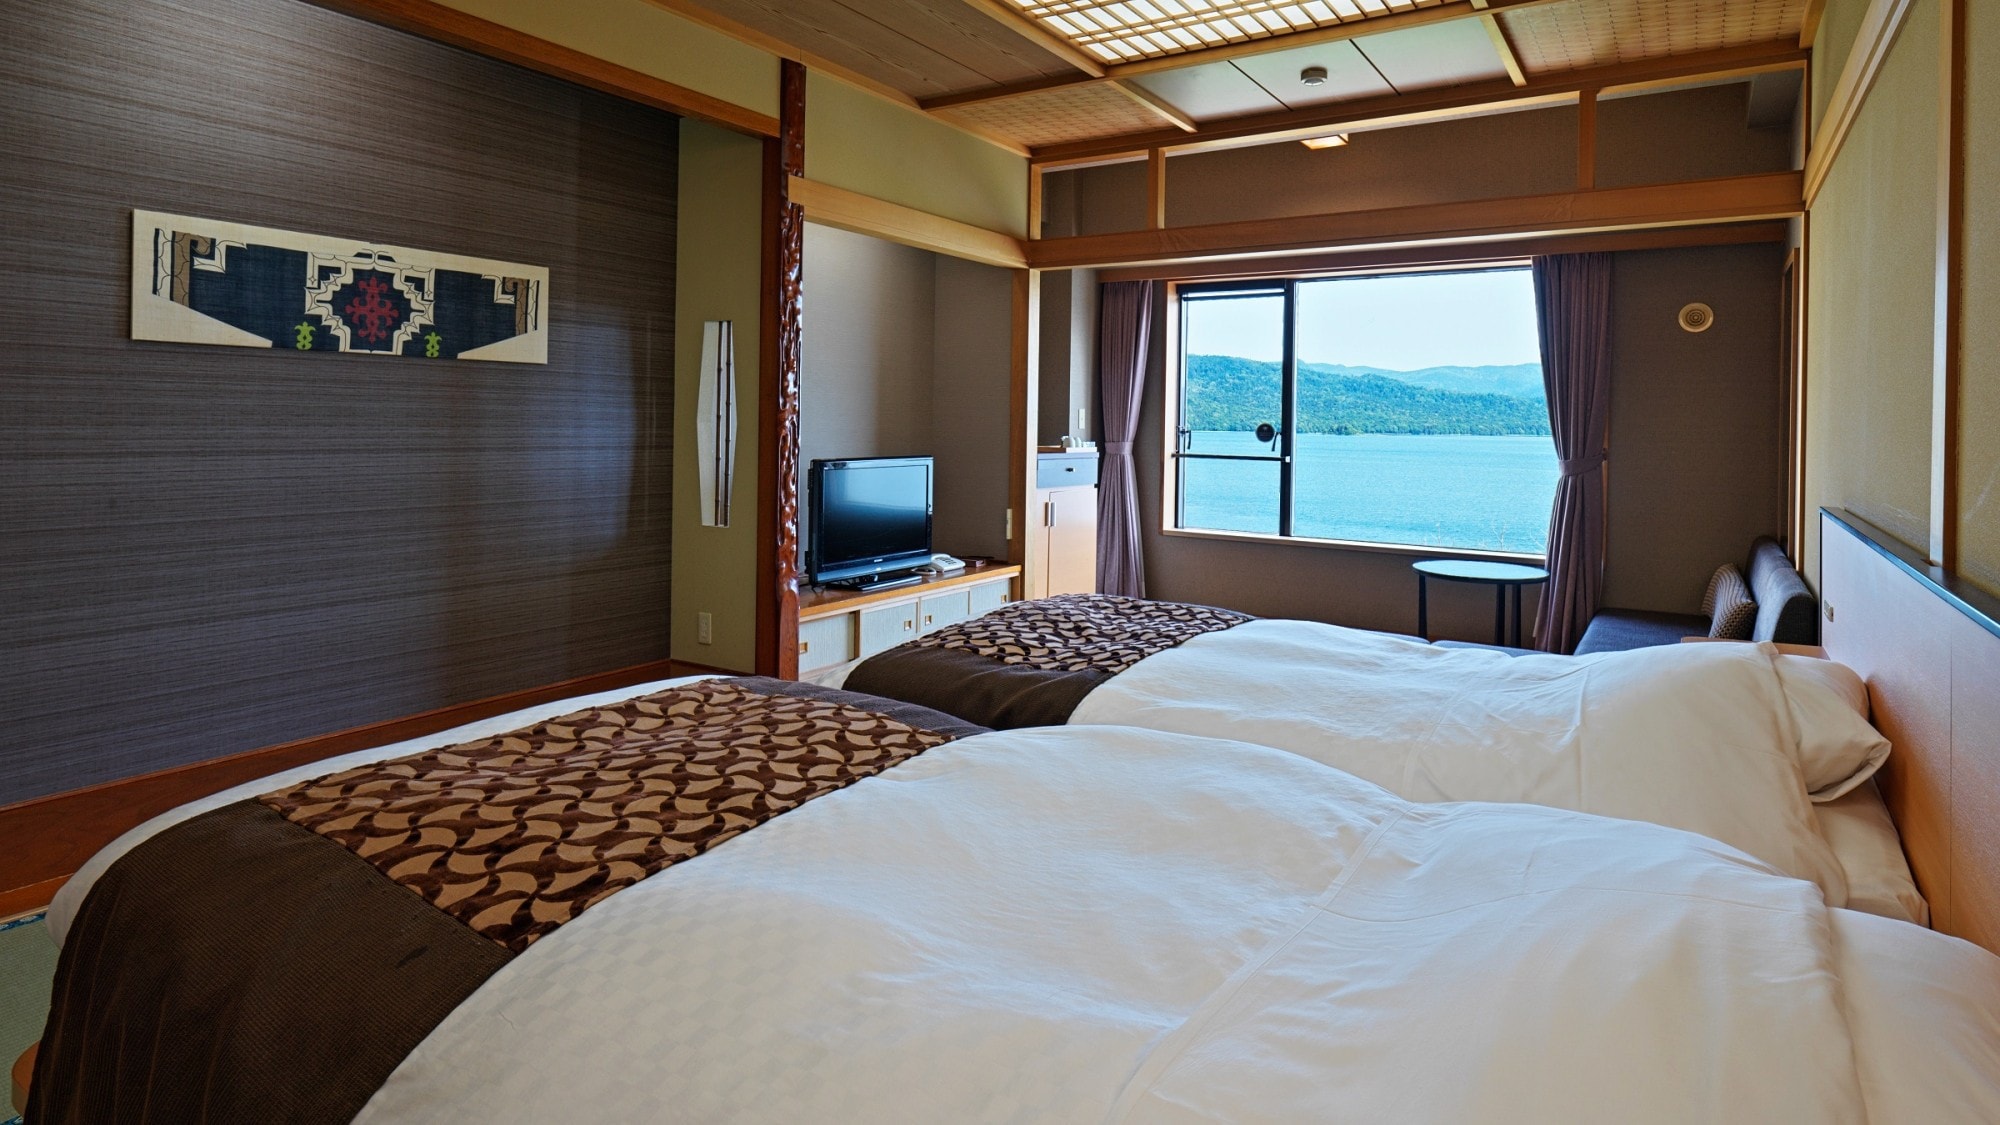 [Lake side] Japanese-style twin room / A room with a feeling of liberation overlooking Lake Akan from the window of the room